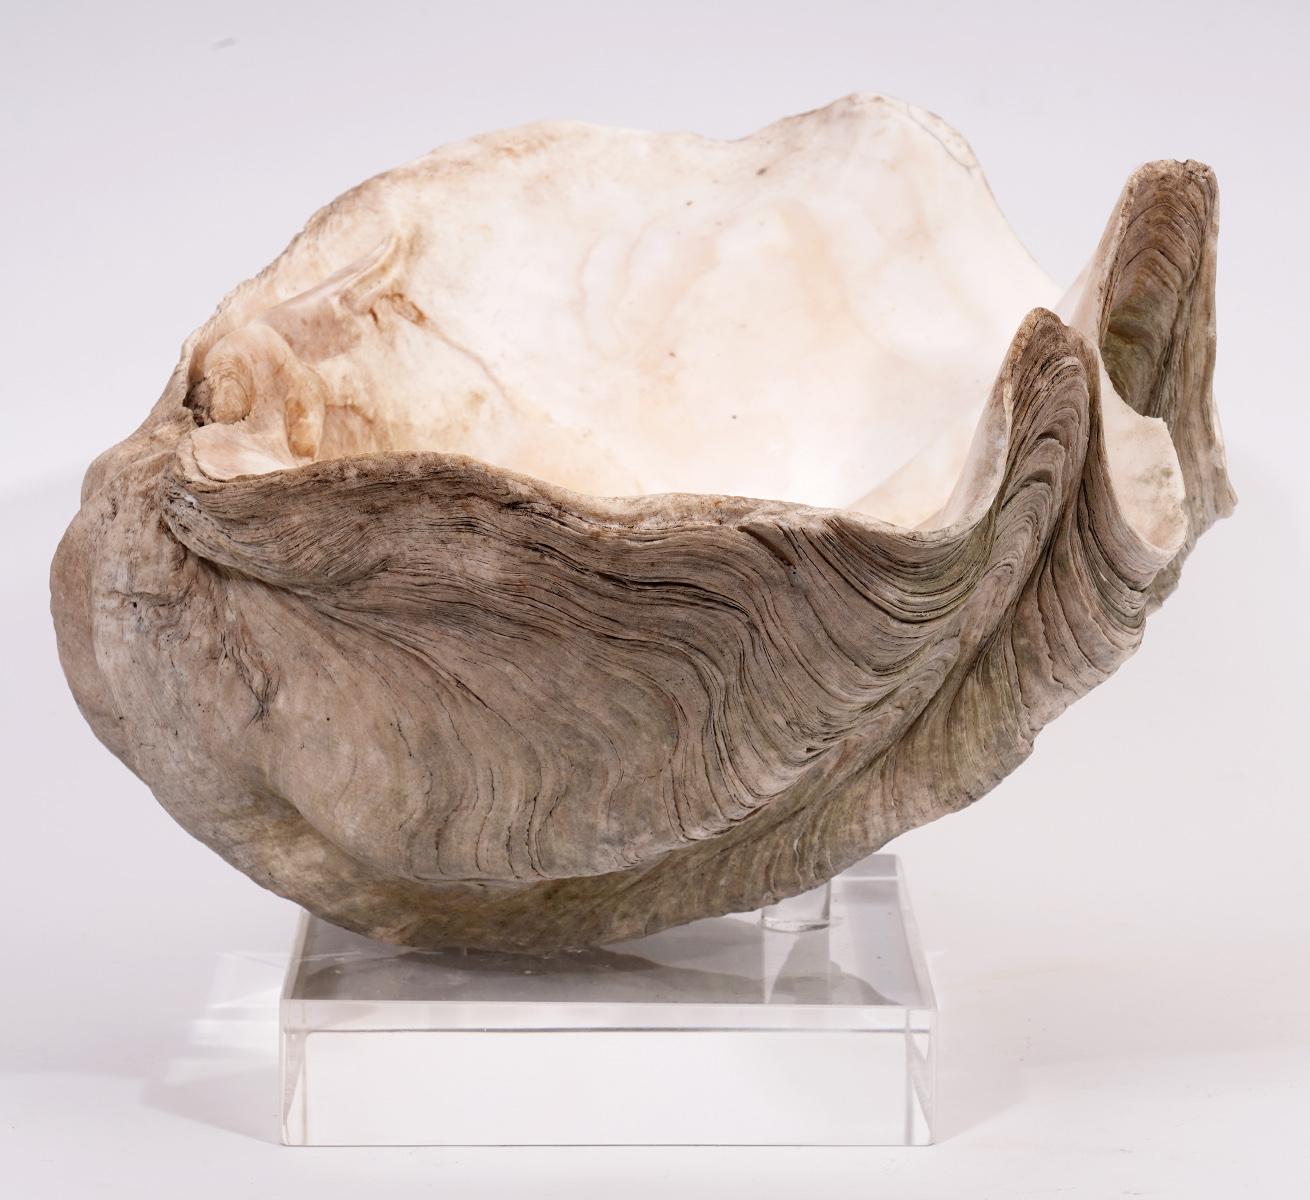 17 inches long this clam shell has great sculptural qualities. The chrome base with Lucite poles in which the shell rests makes it easy to place and raises the shell for an enhanced visual impression.